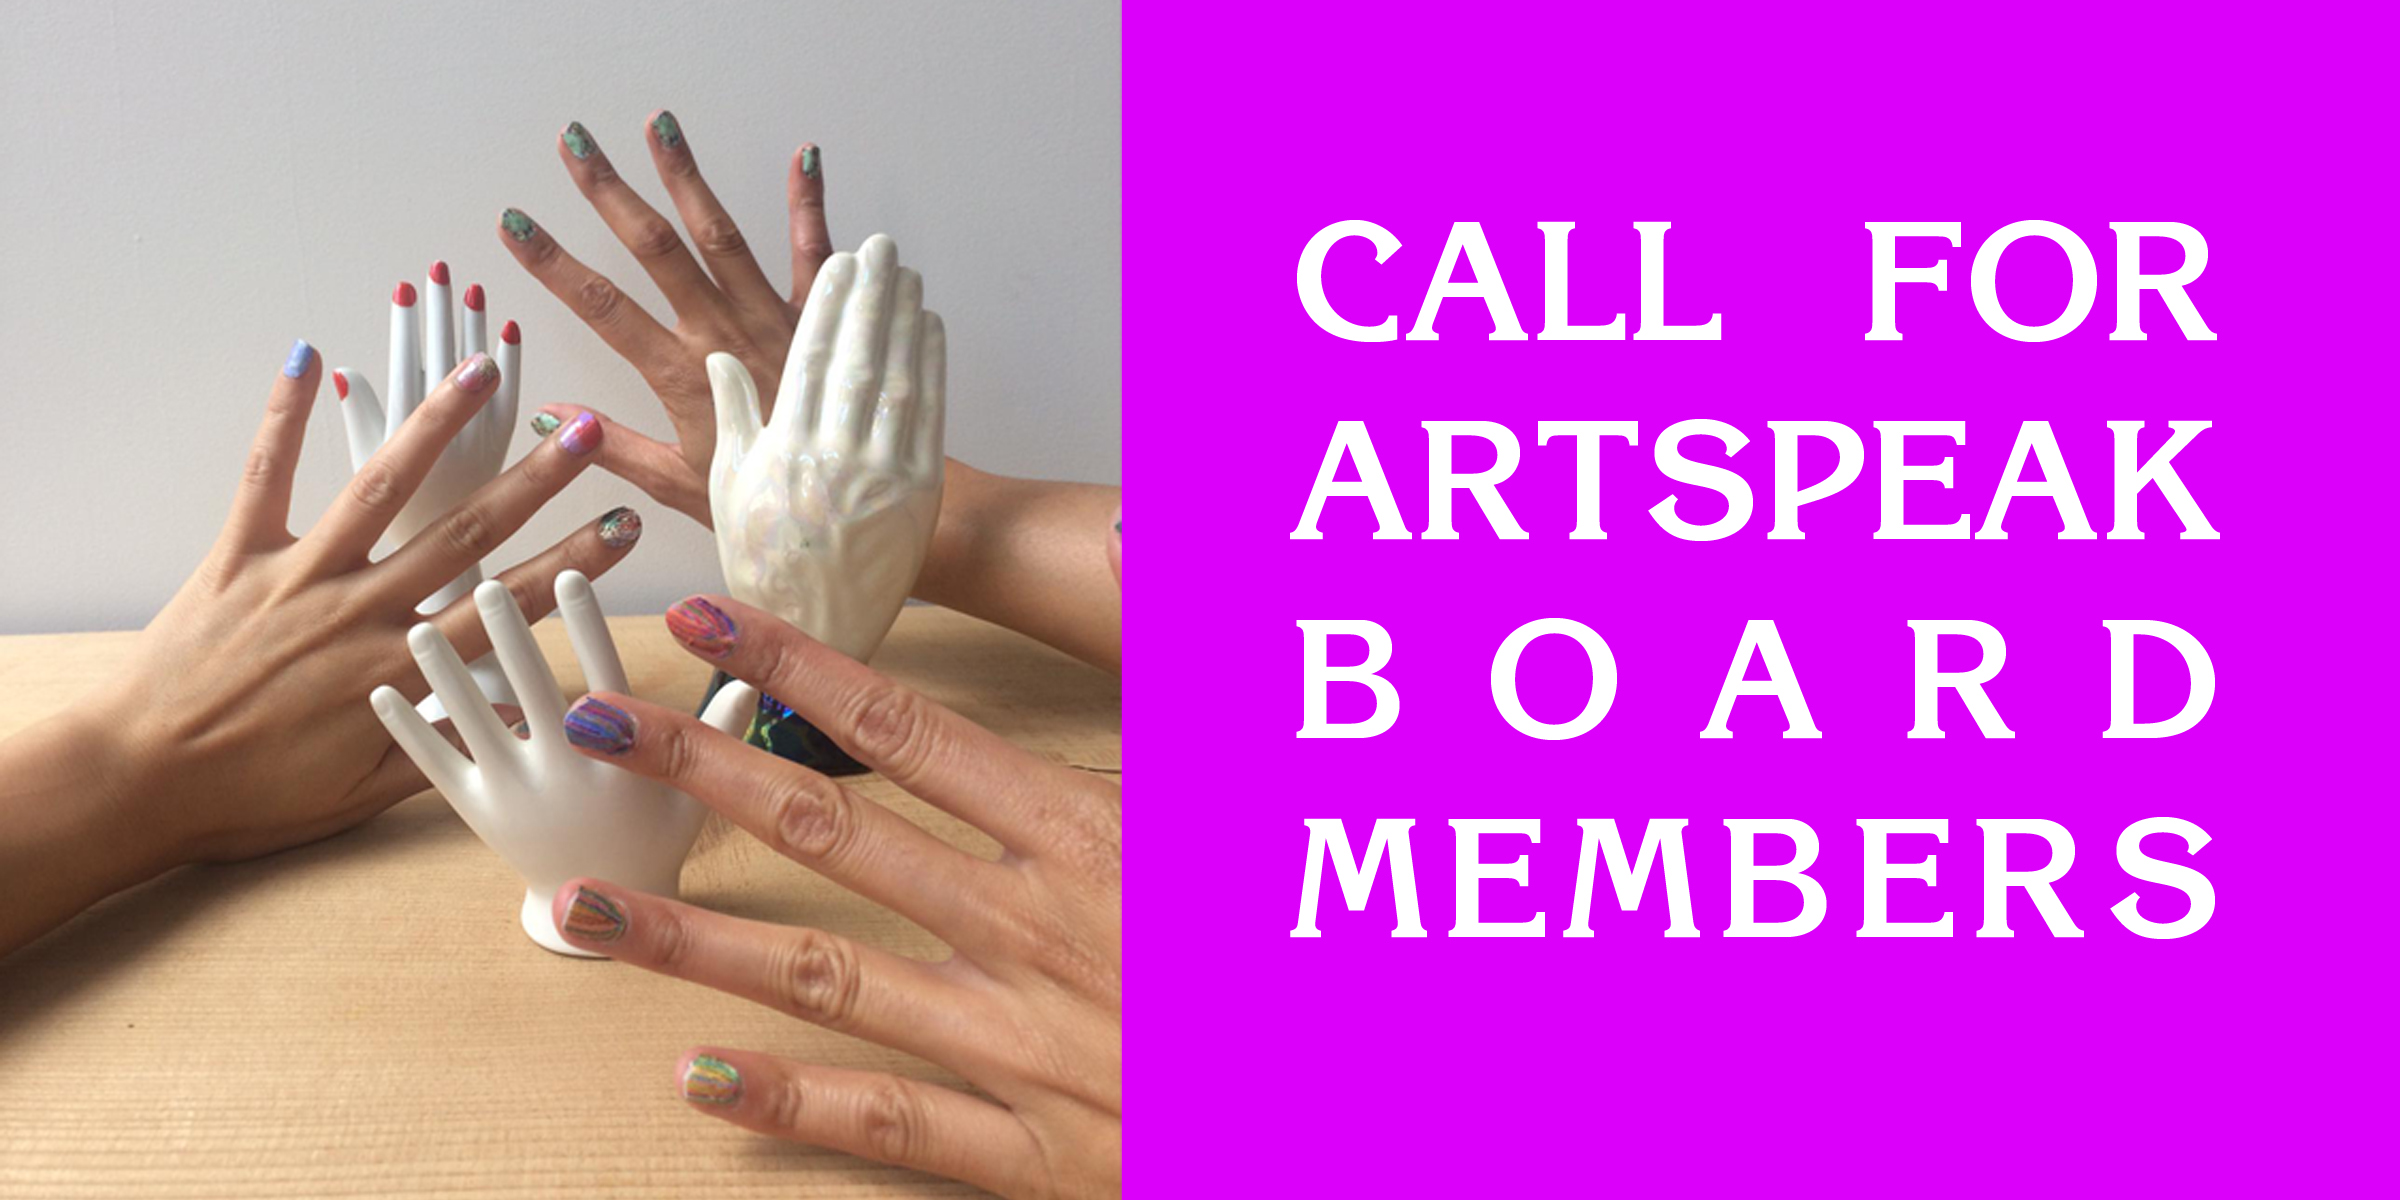 On the left, three hands and three mannequin hands are visible with colourful nail polish. On the right, white text on hot pink background reads 